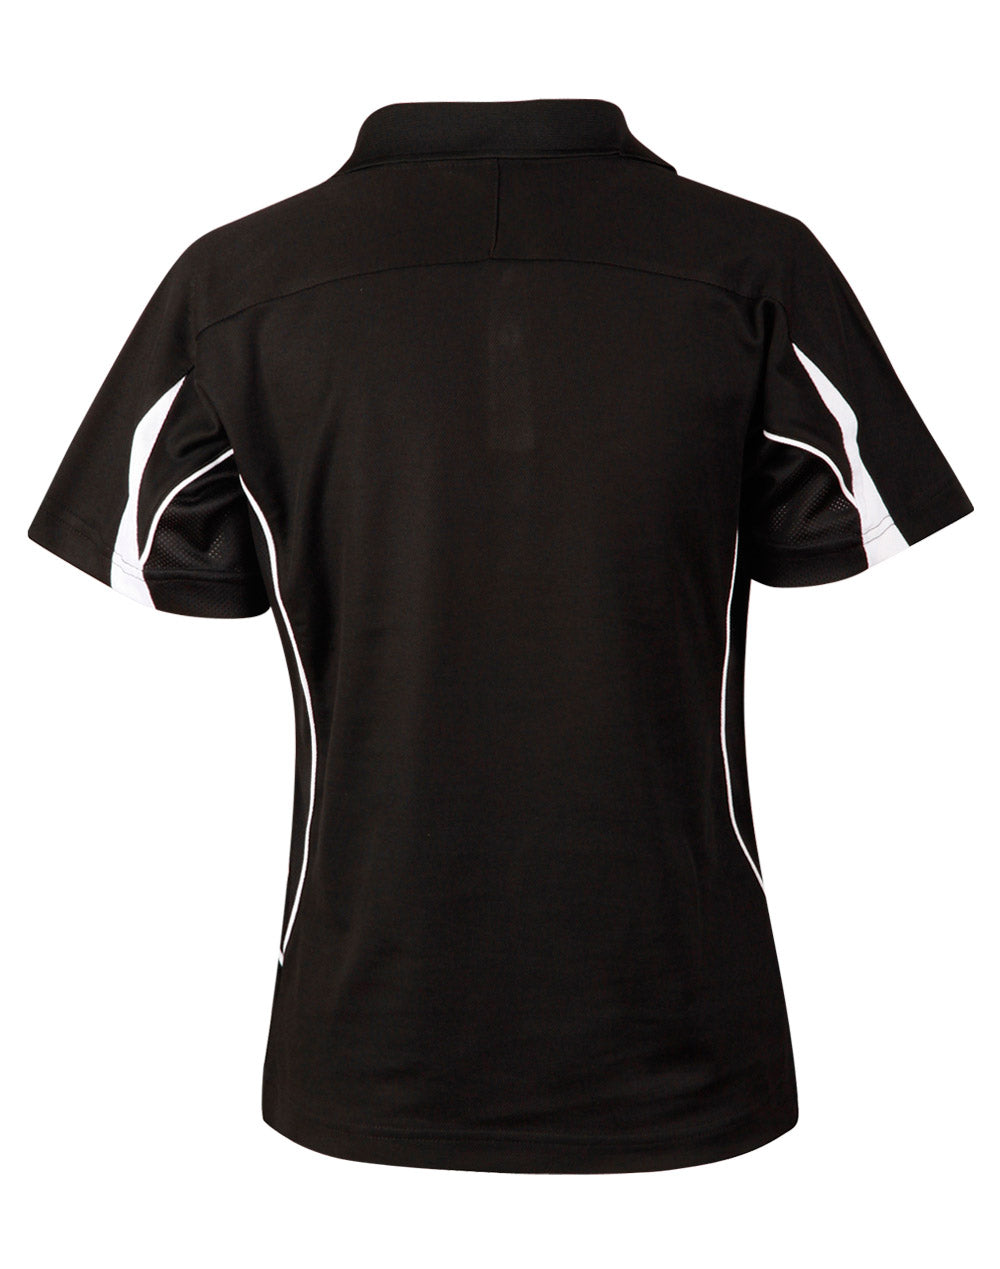 Ladies Sport TrueDry Polo Short Sleeve 160gsm - PS54 (11 colours)